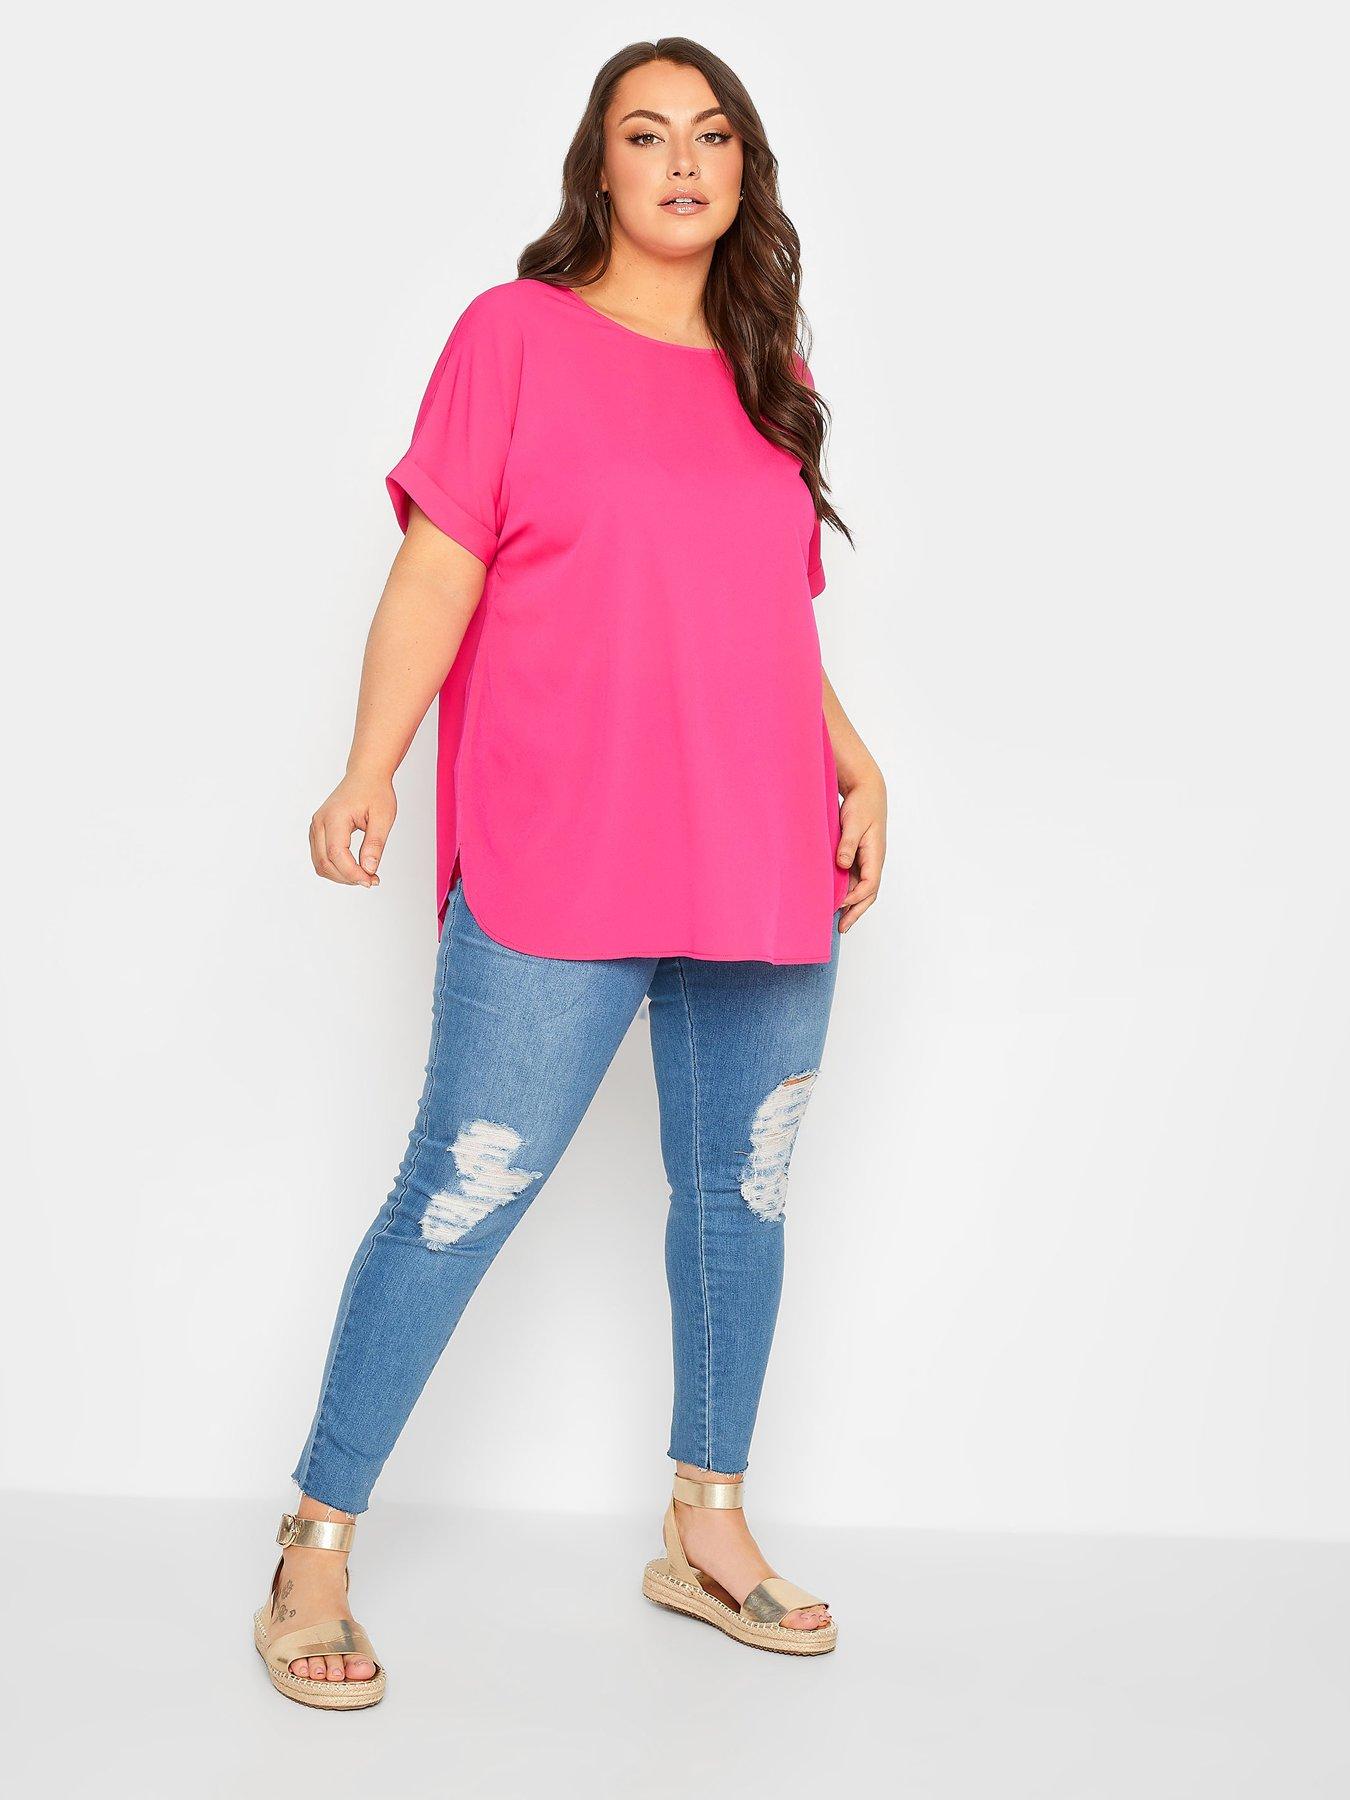 Yours Short Sleeve Boxy Top - Hot Pink